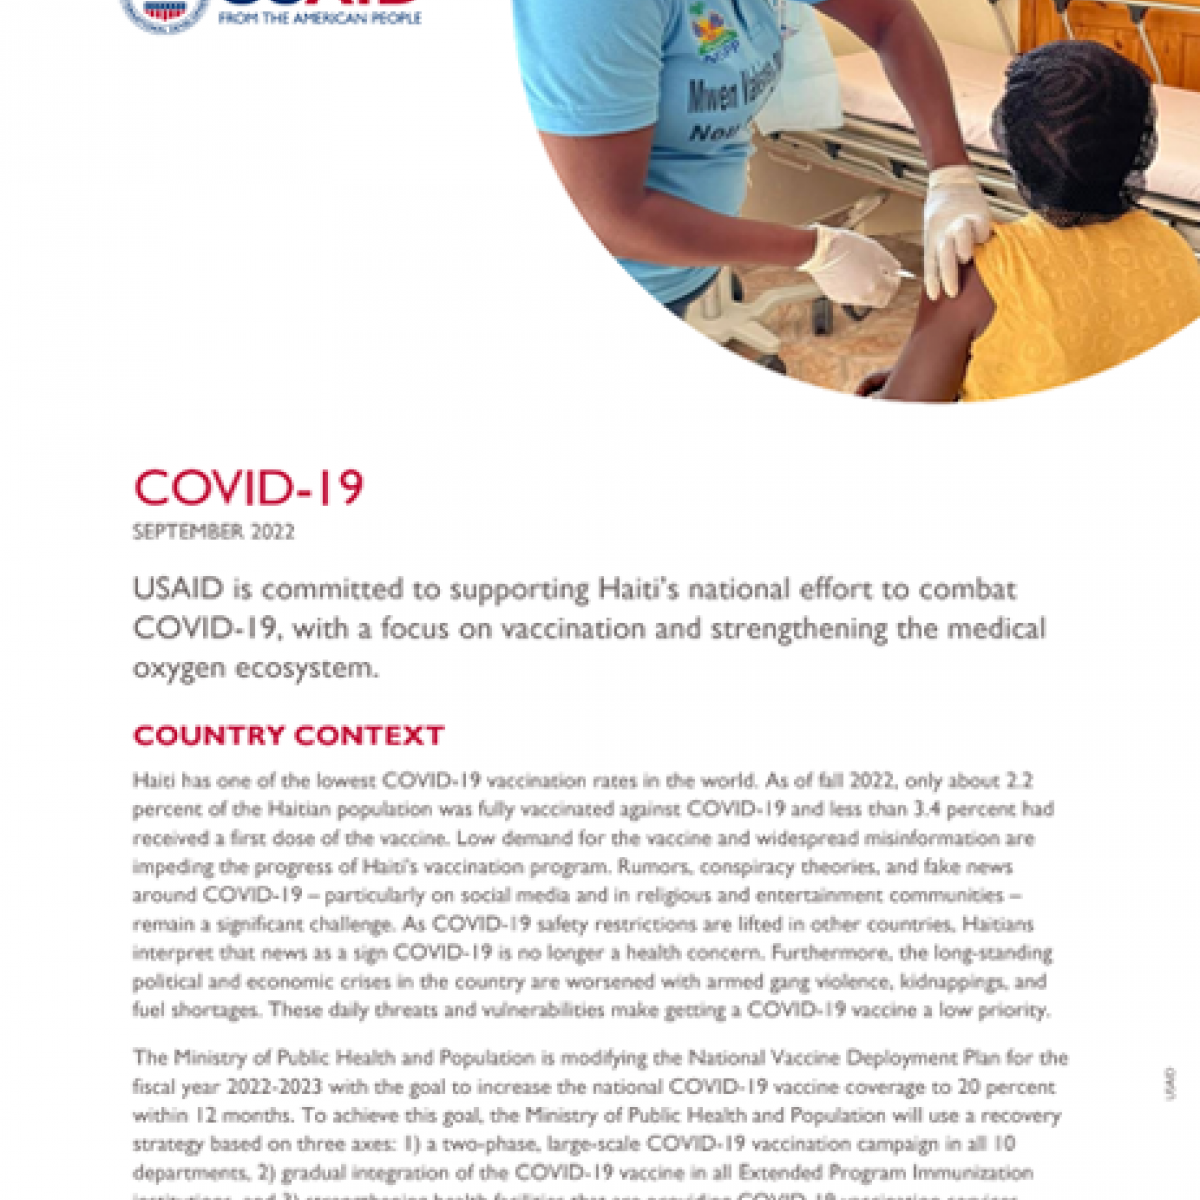 This image represents the cover page of the Haiti Health COVID-19 fact sheet 